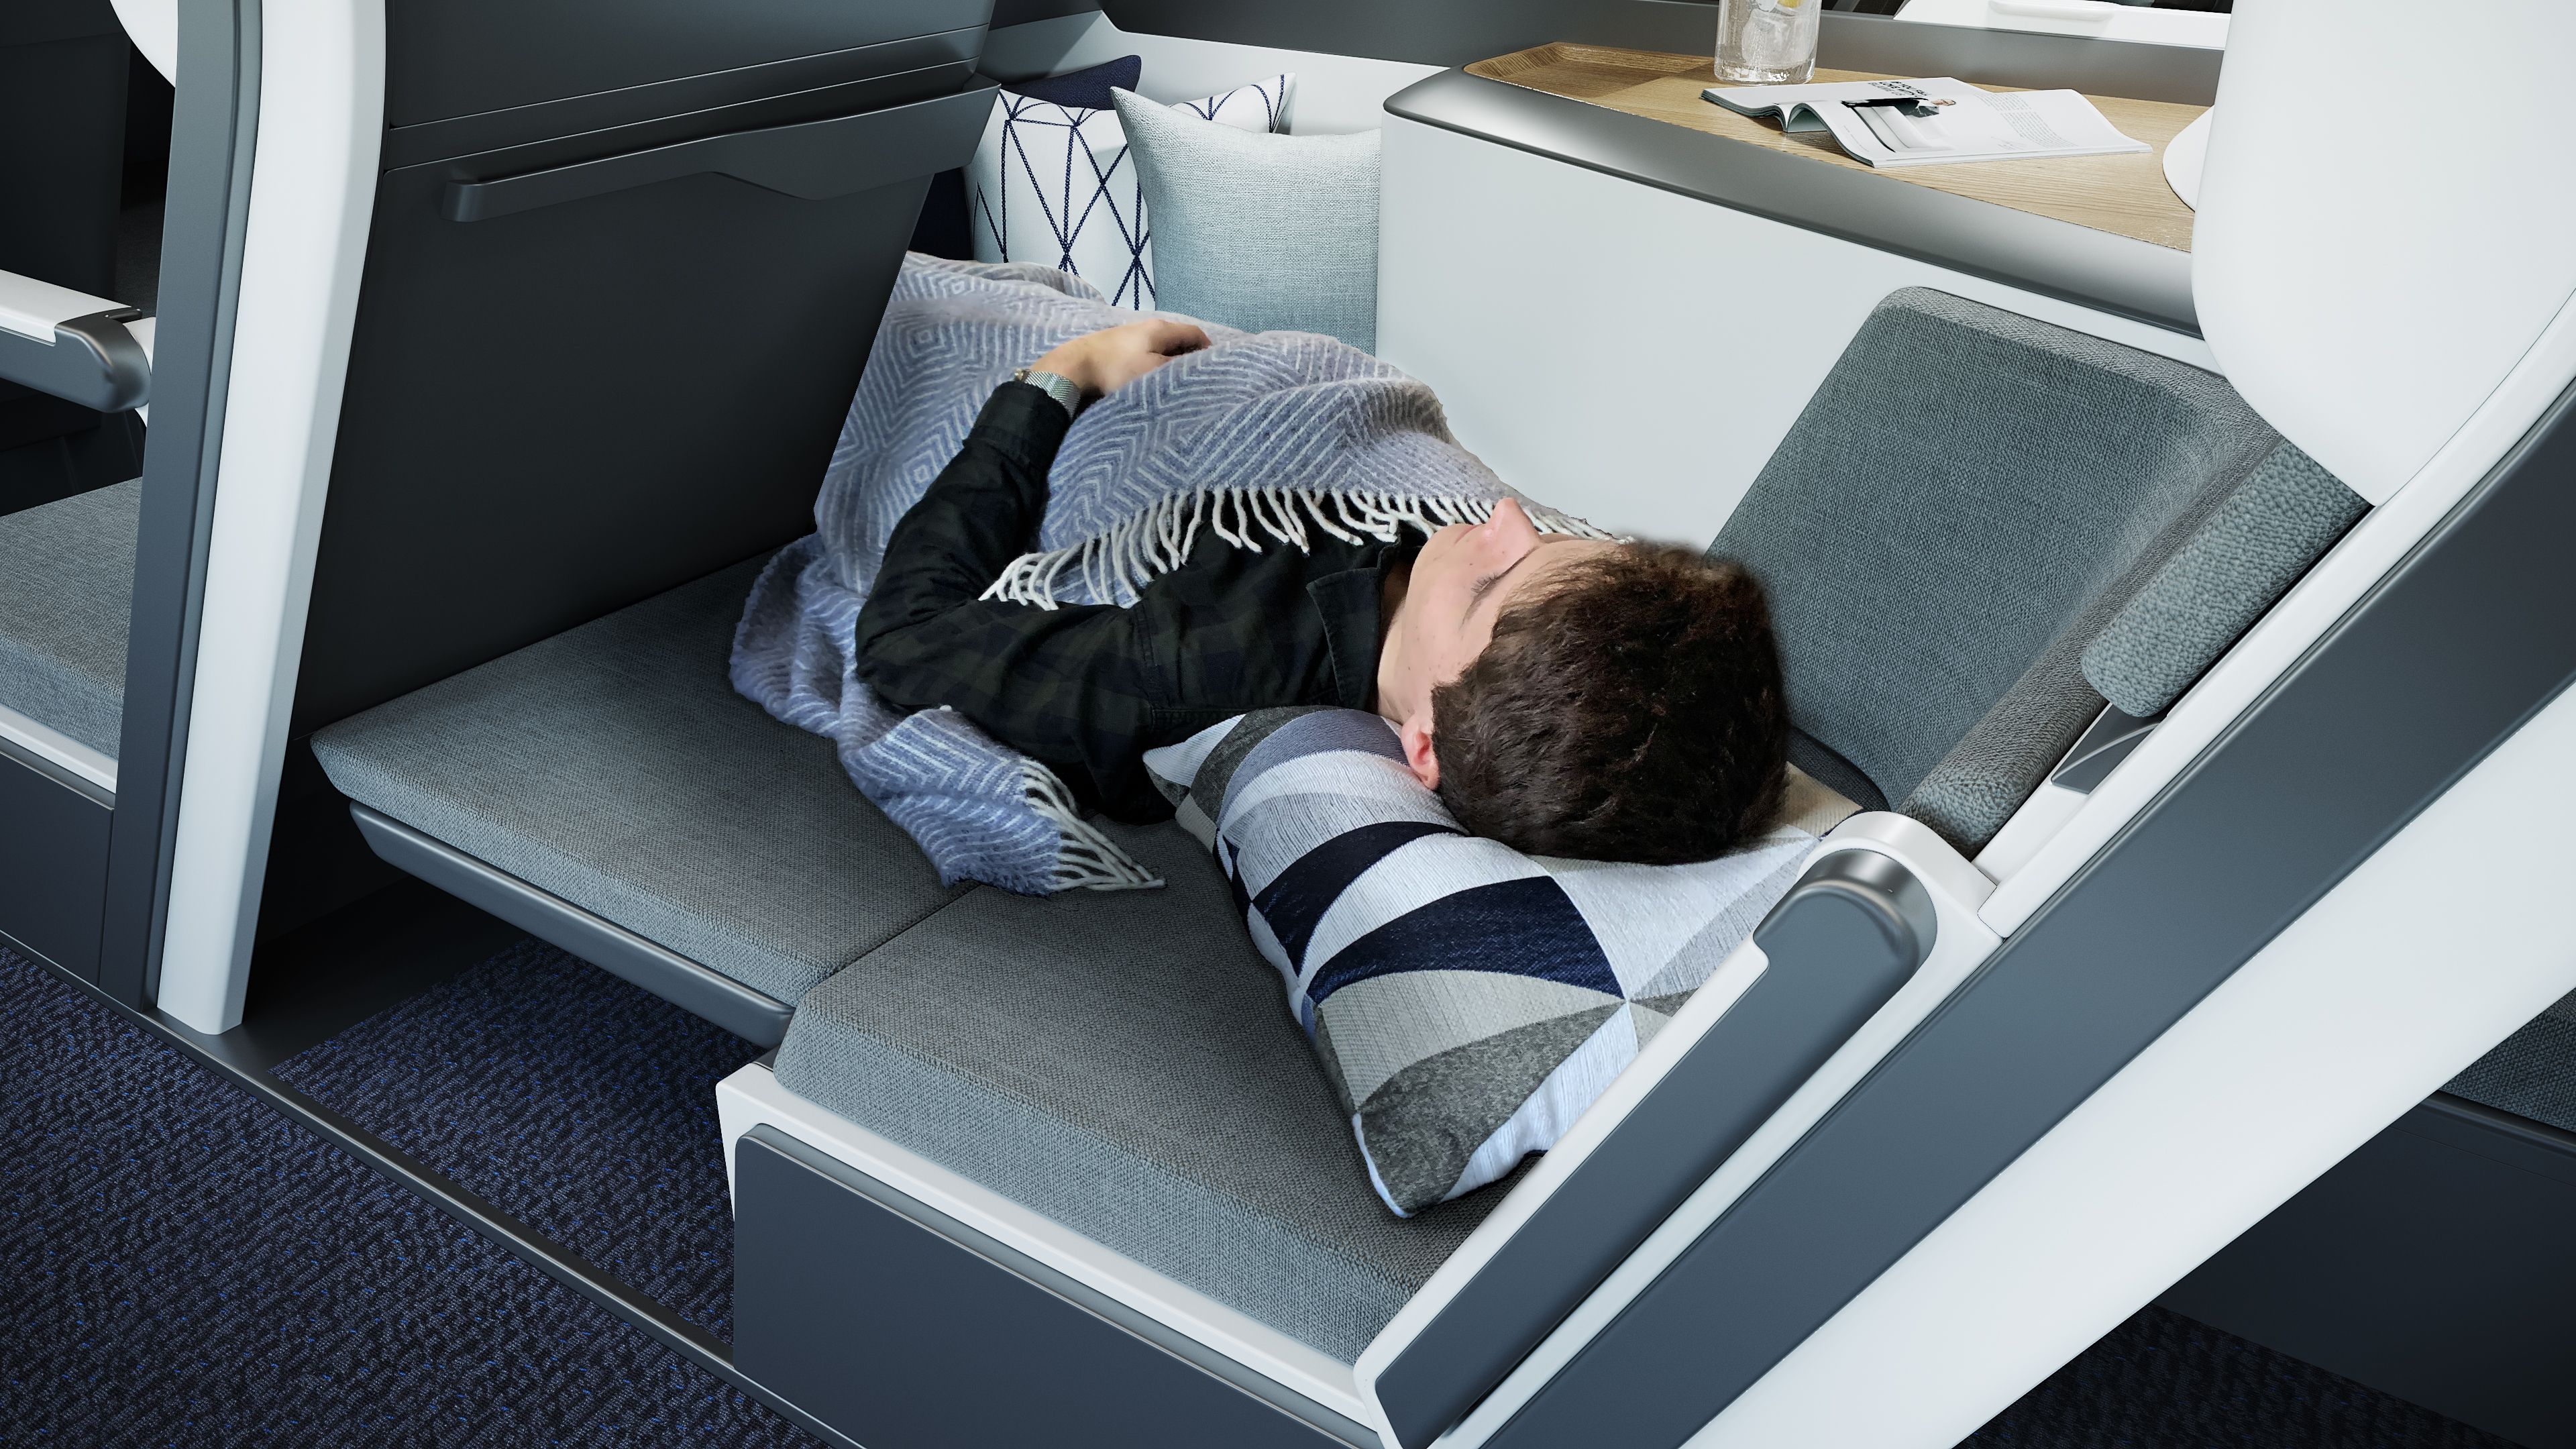 These airplane 'seats' are the closest thing to your bed at home